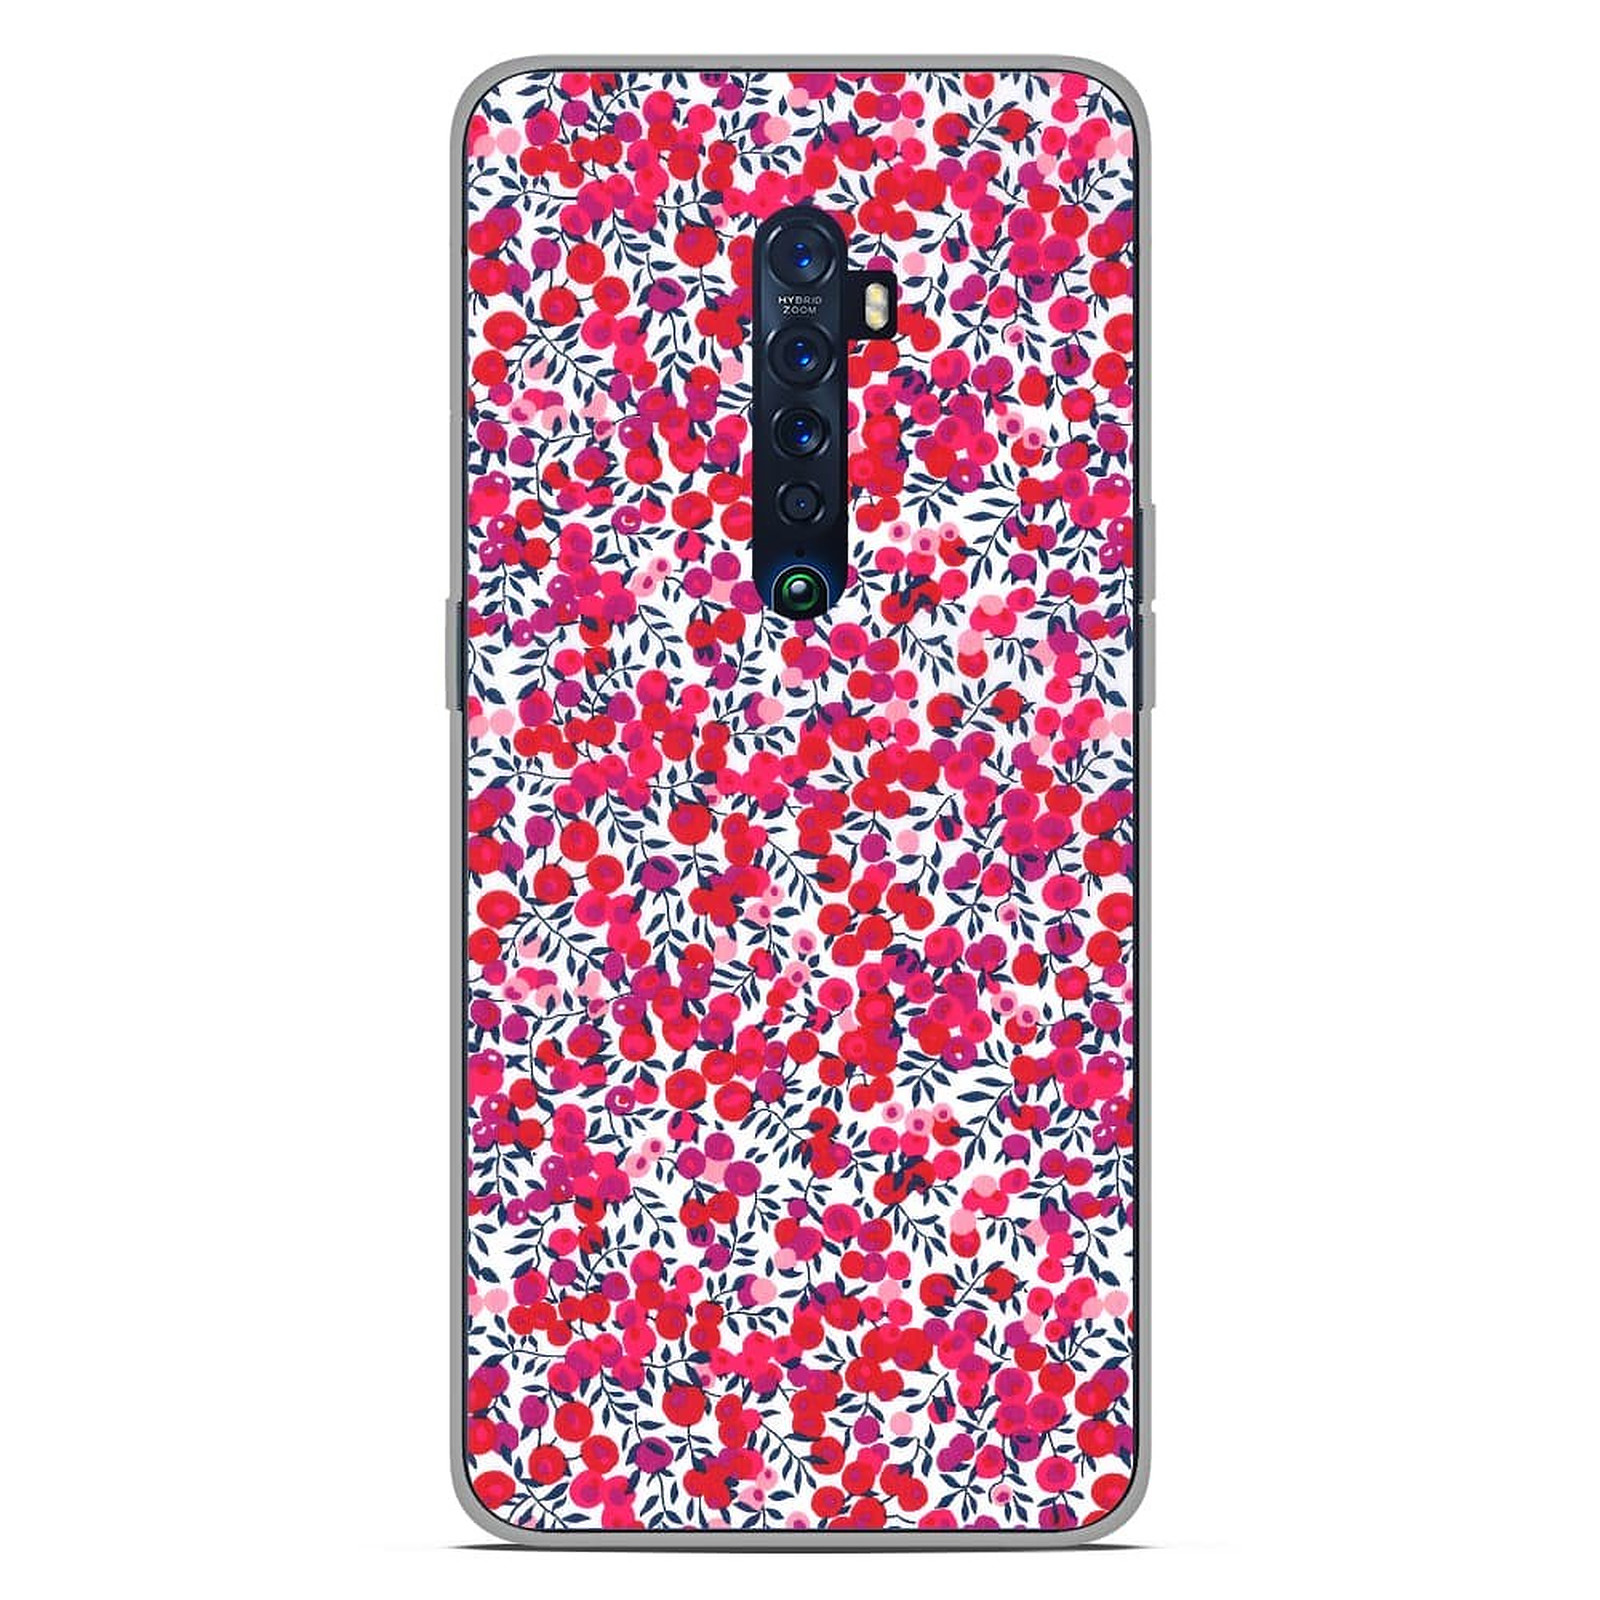 1001 Coques Coque silicone gel Oppo Reno 2 motif Liberty Wiltshire Rouge - Coque telephone 1001Coques